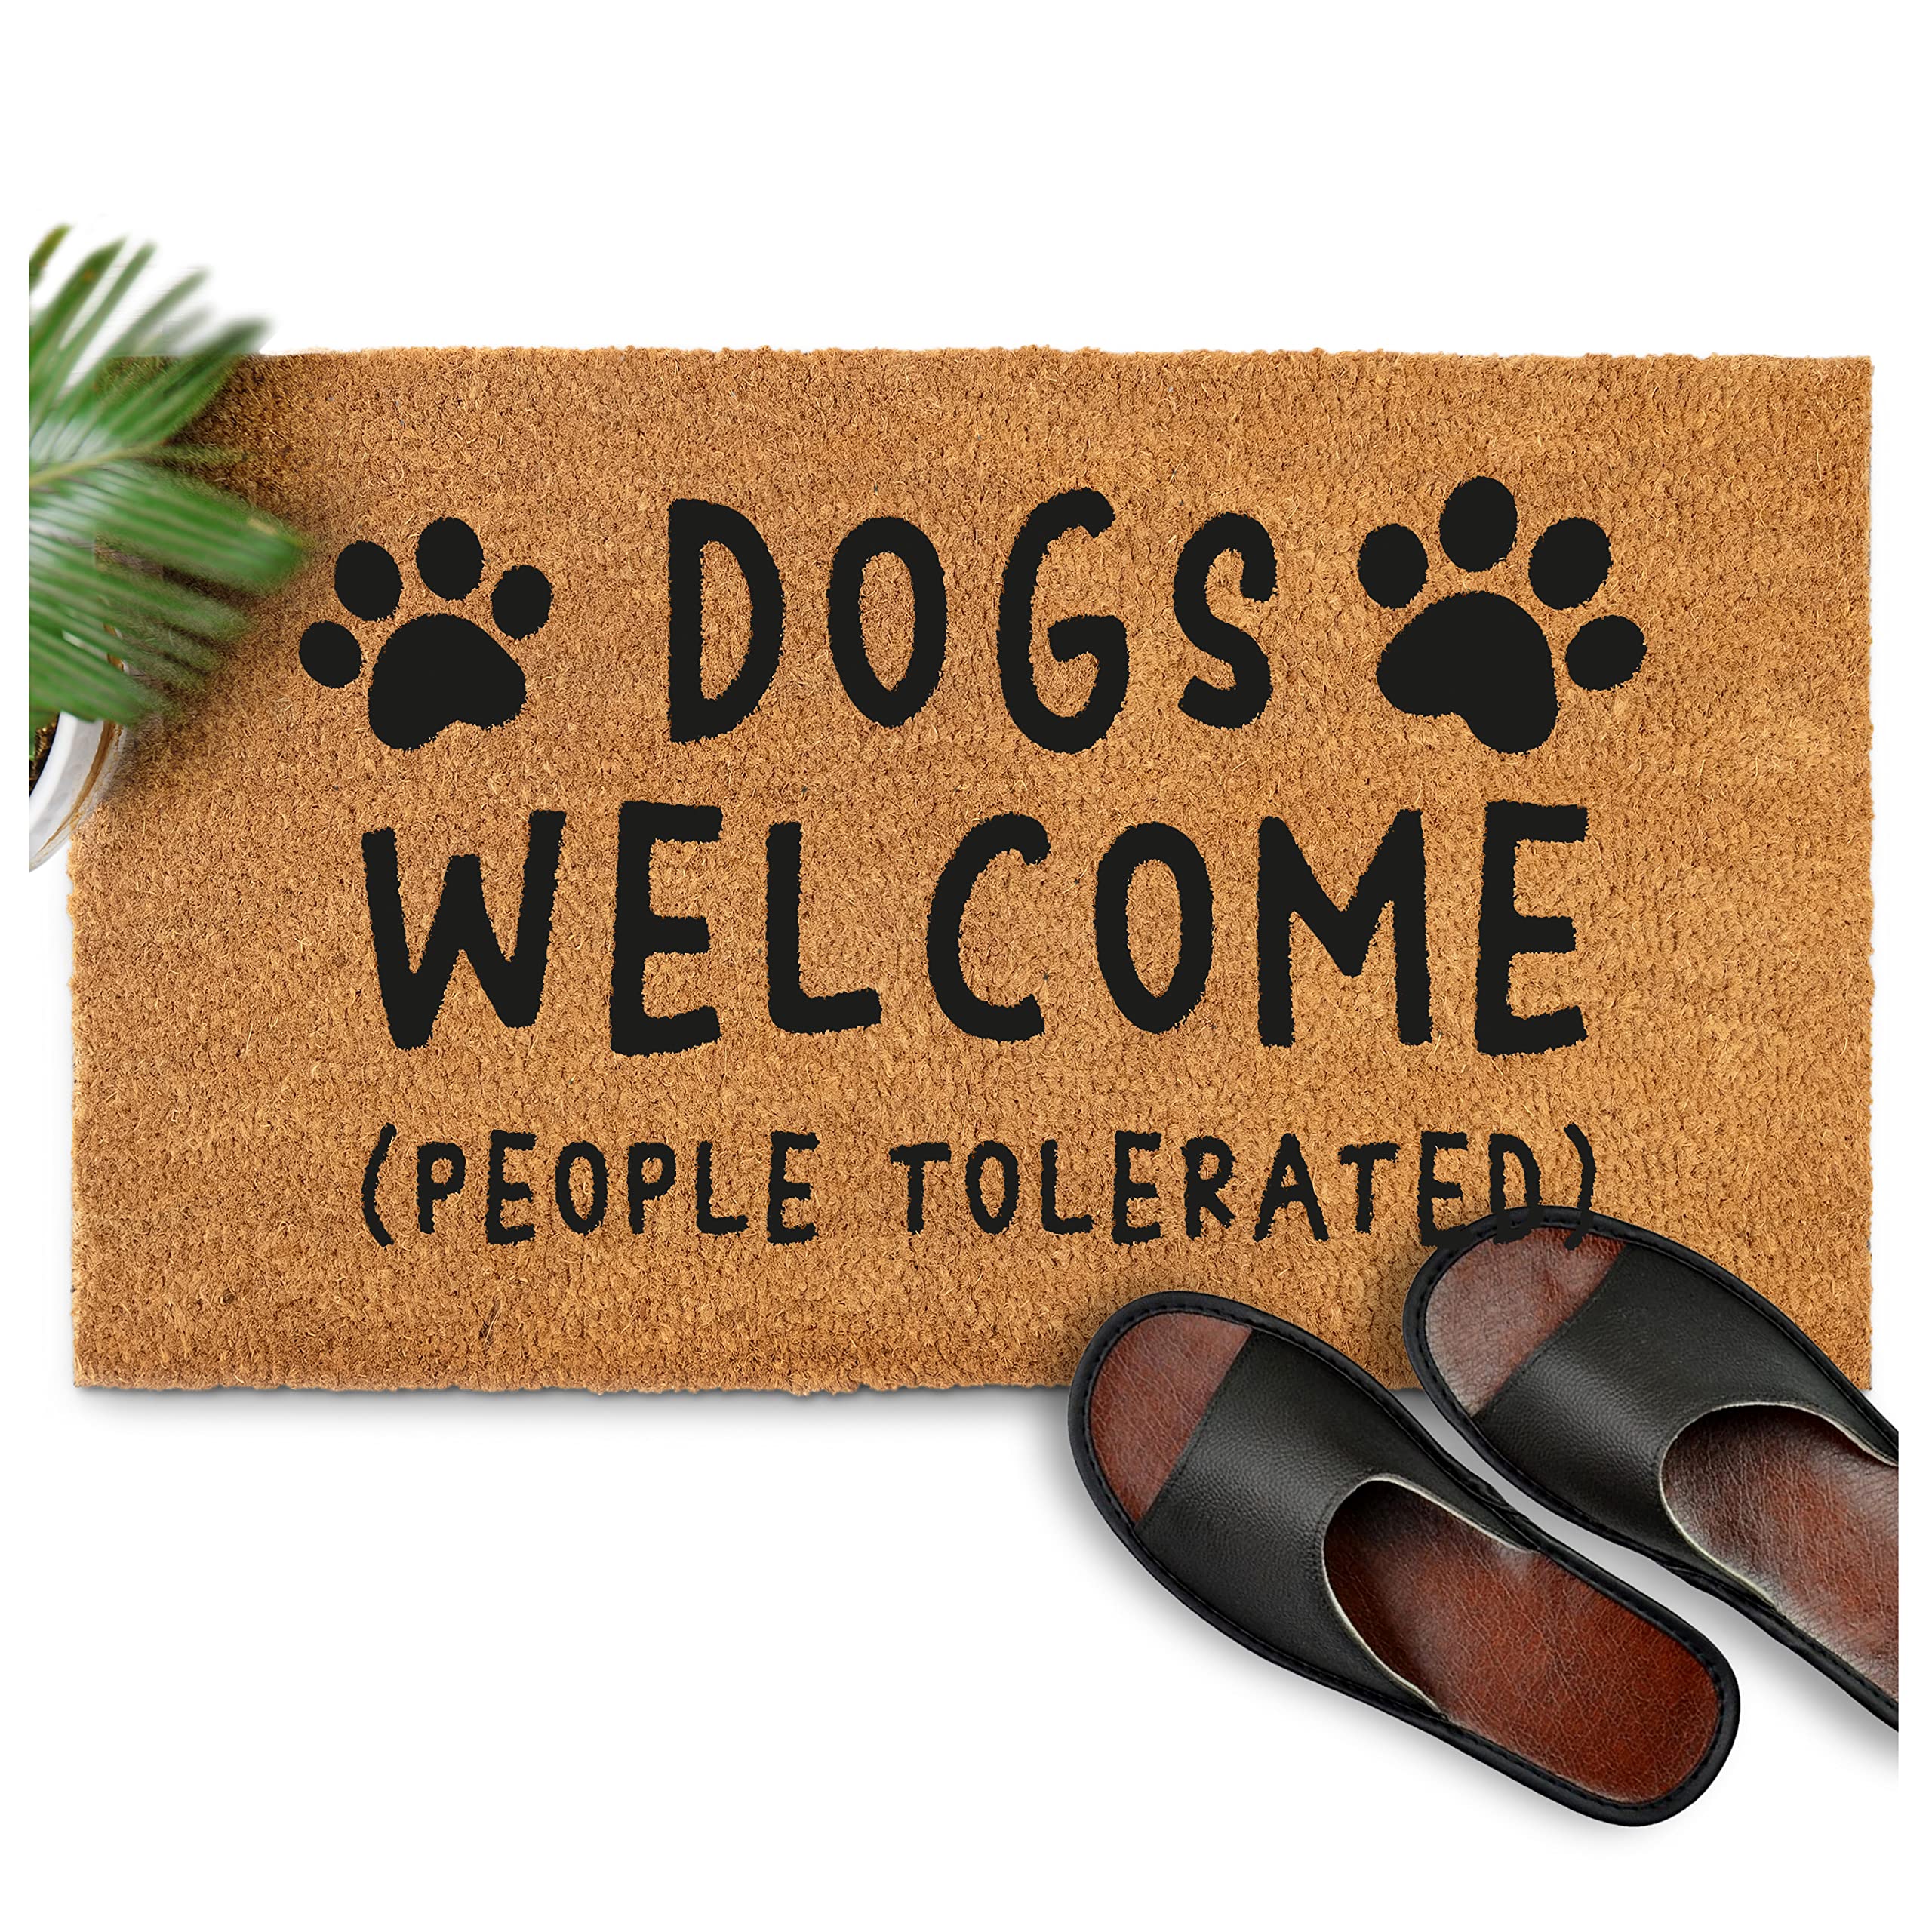 MAINEVENT Dogs Welcome People Tolerated Door Mat 30x17 Inch, Funny